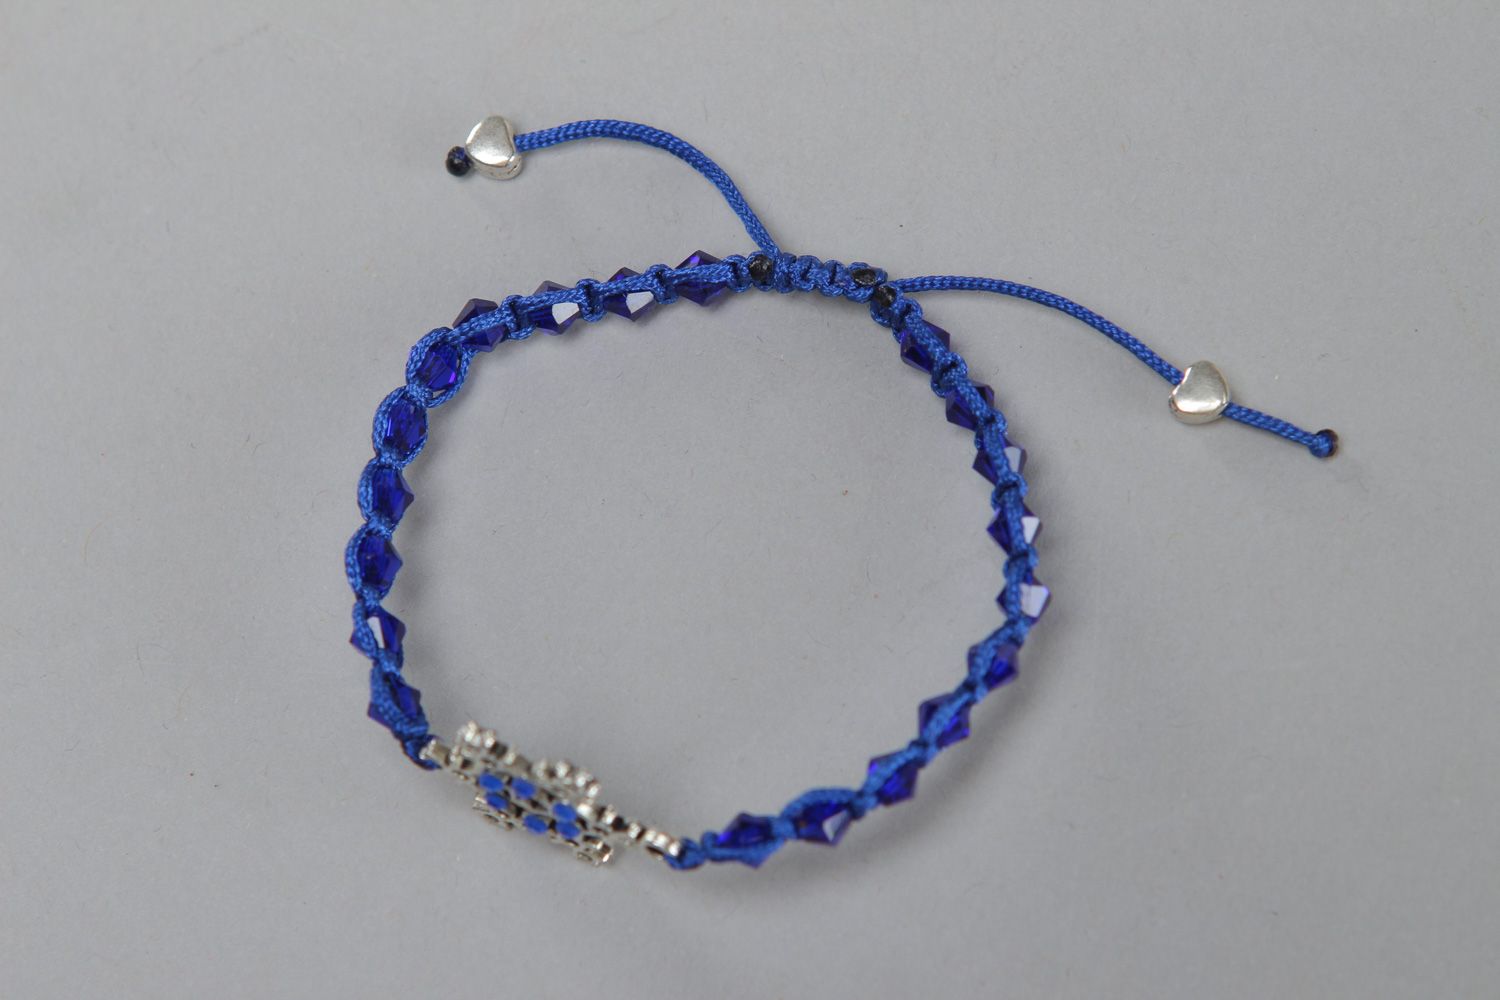 Handmade friendship bracelet woven of cord with crystal beads and metal snowflake photo 2